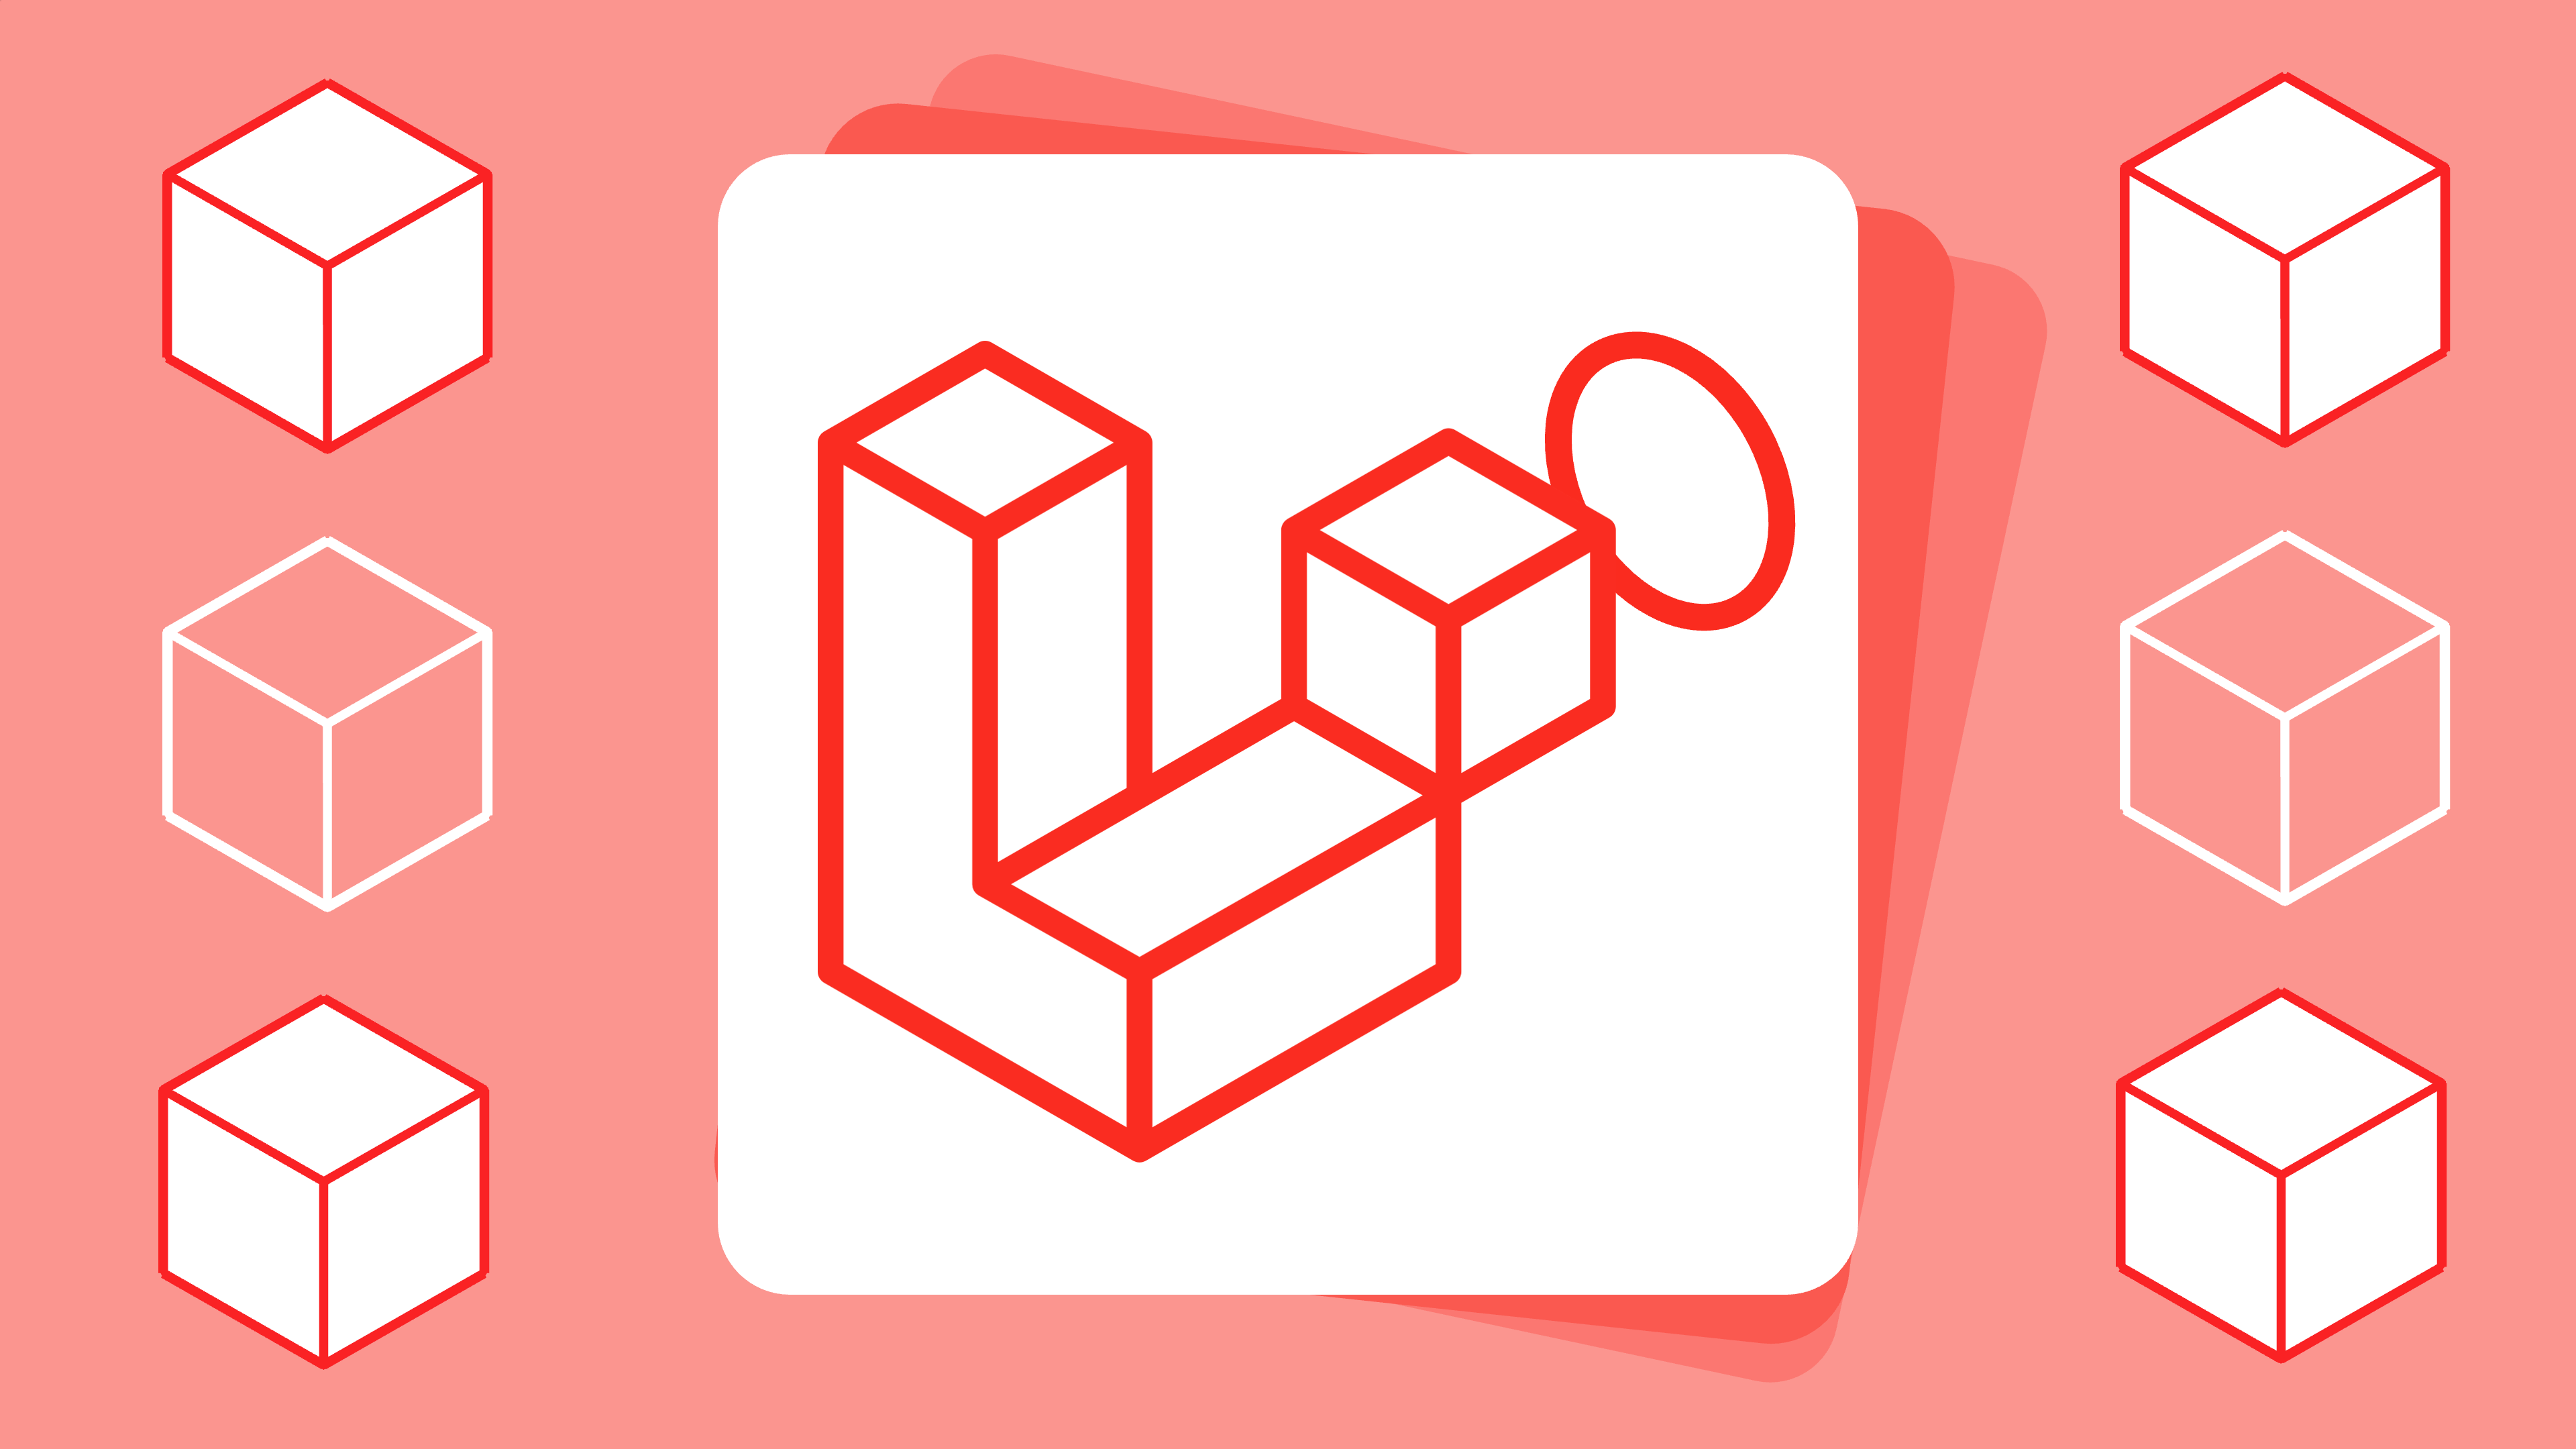 A square peg (Laravel) is forced into a round hole (best practices) 
